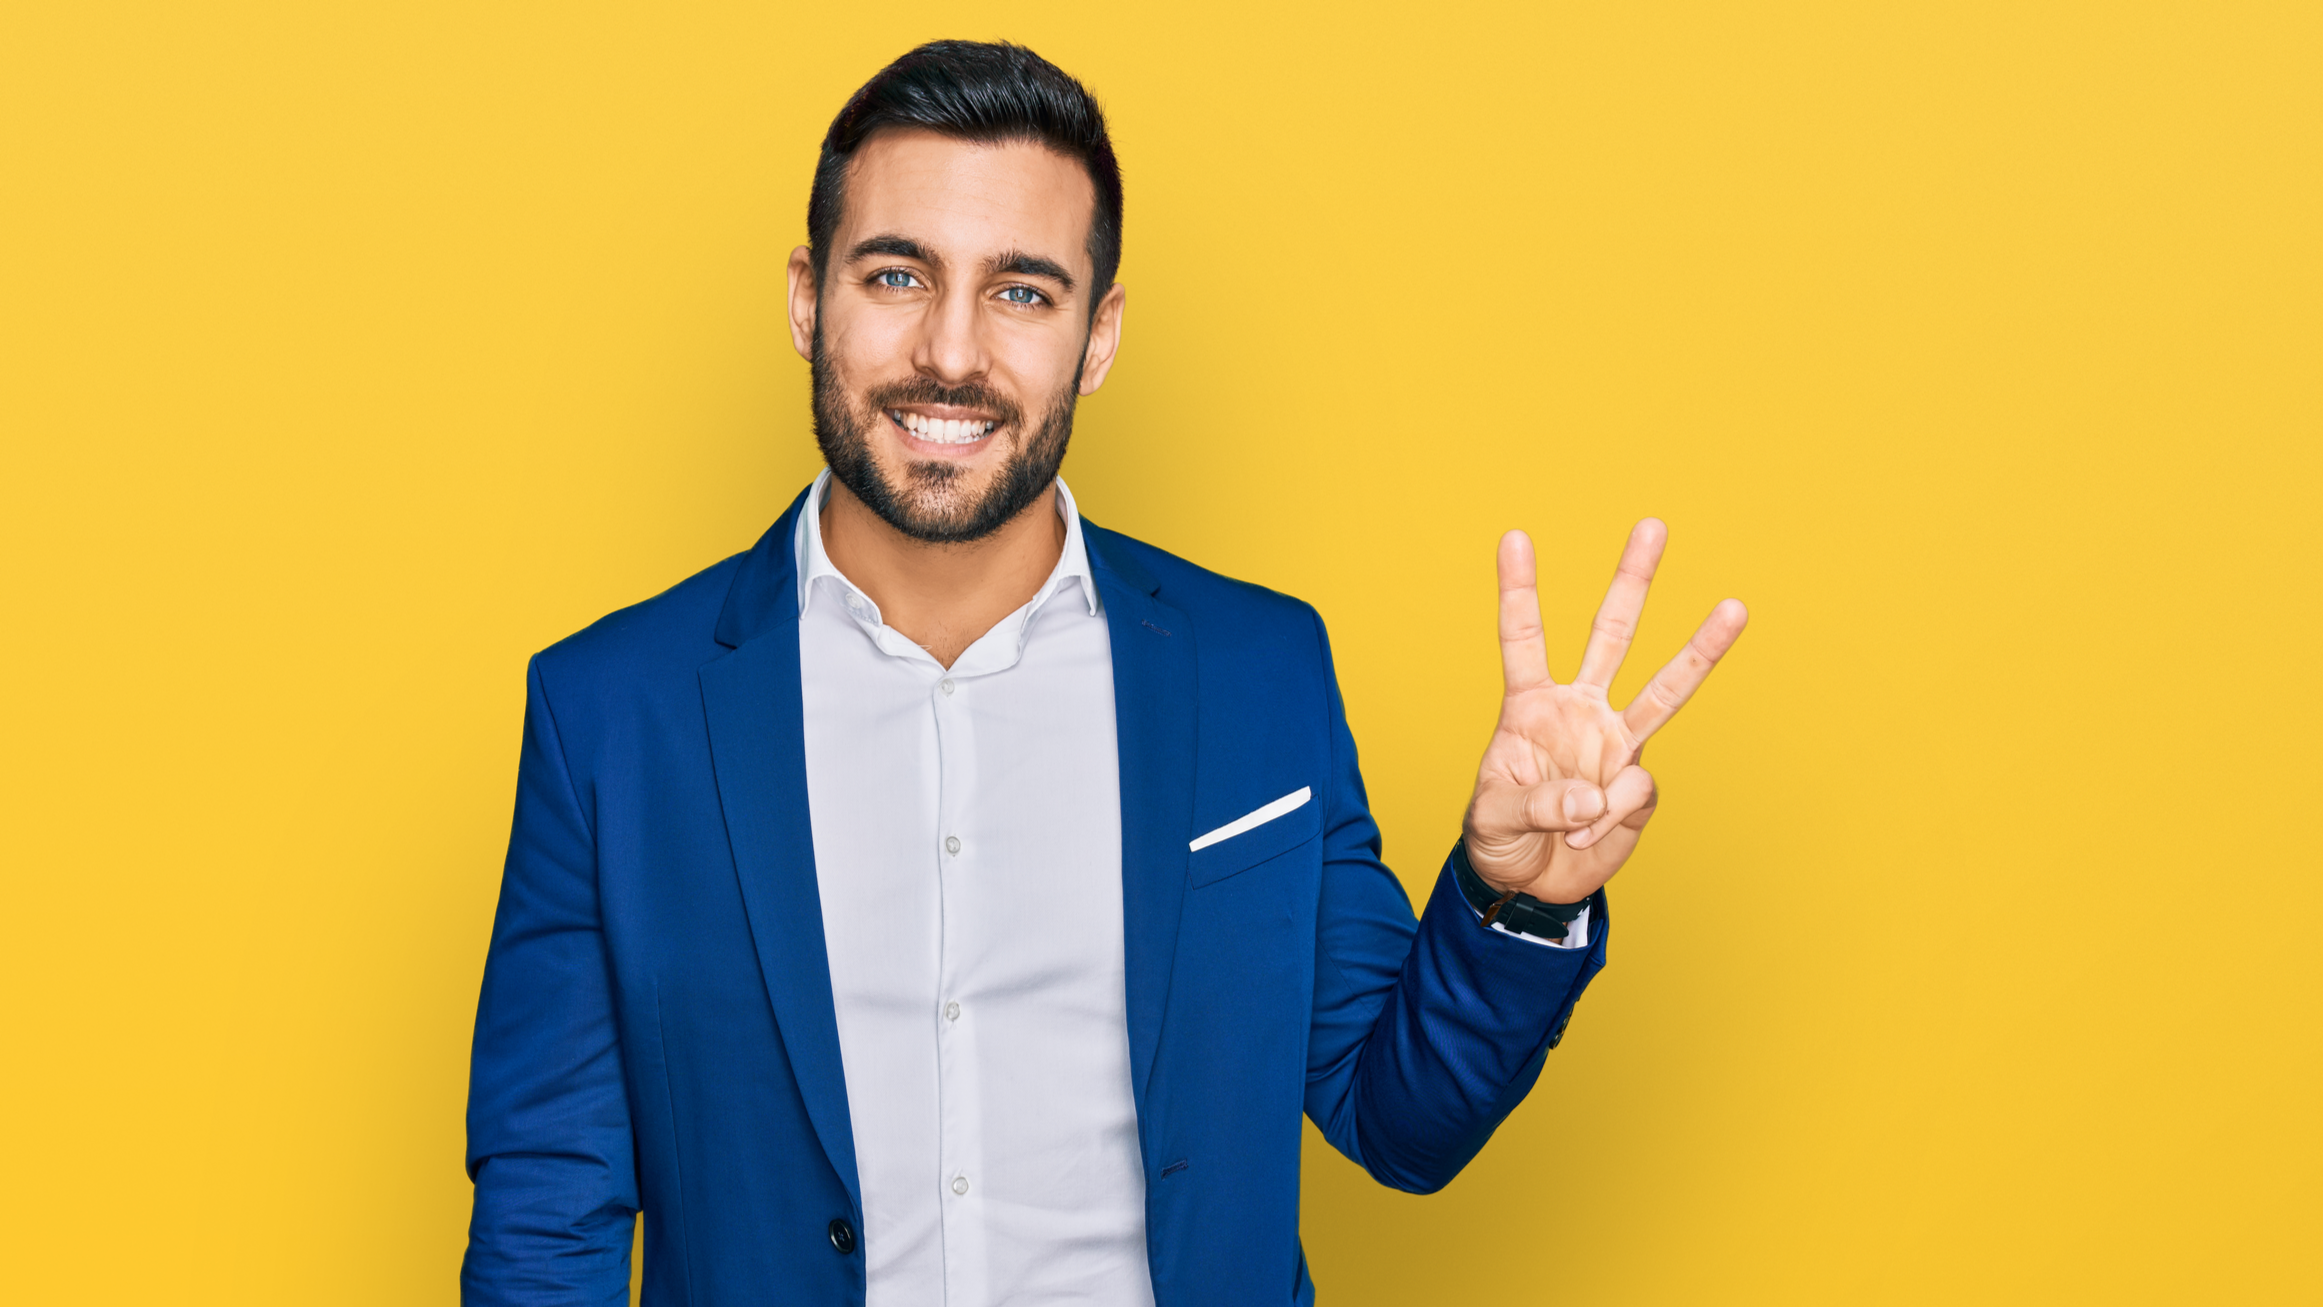 Business person holding up 3 fingers. Concept of 3.